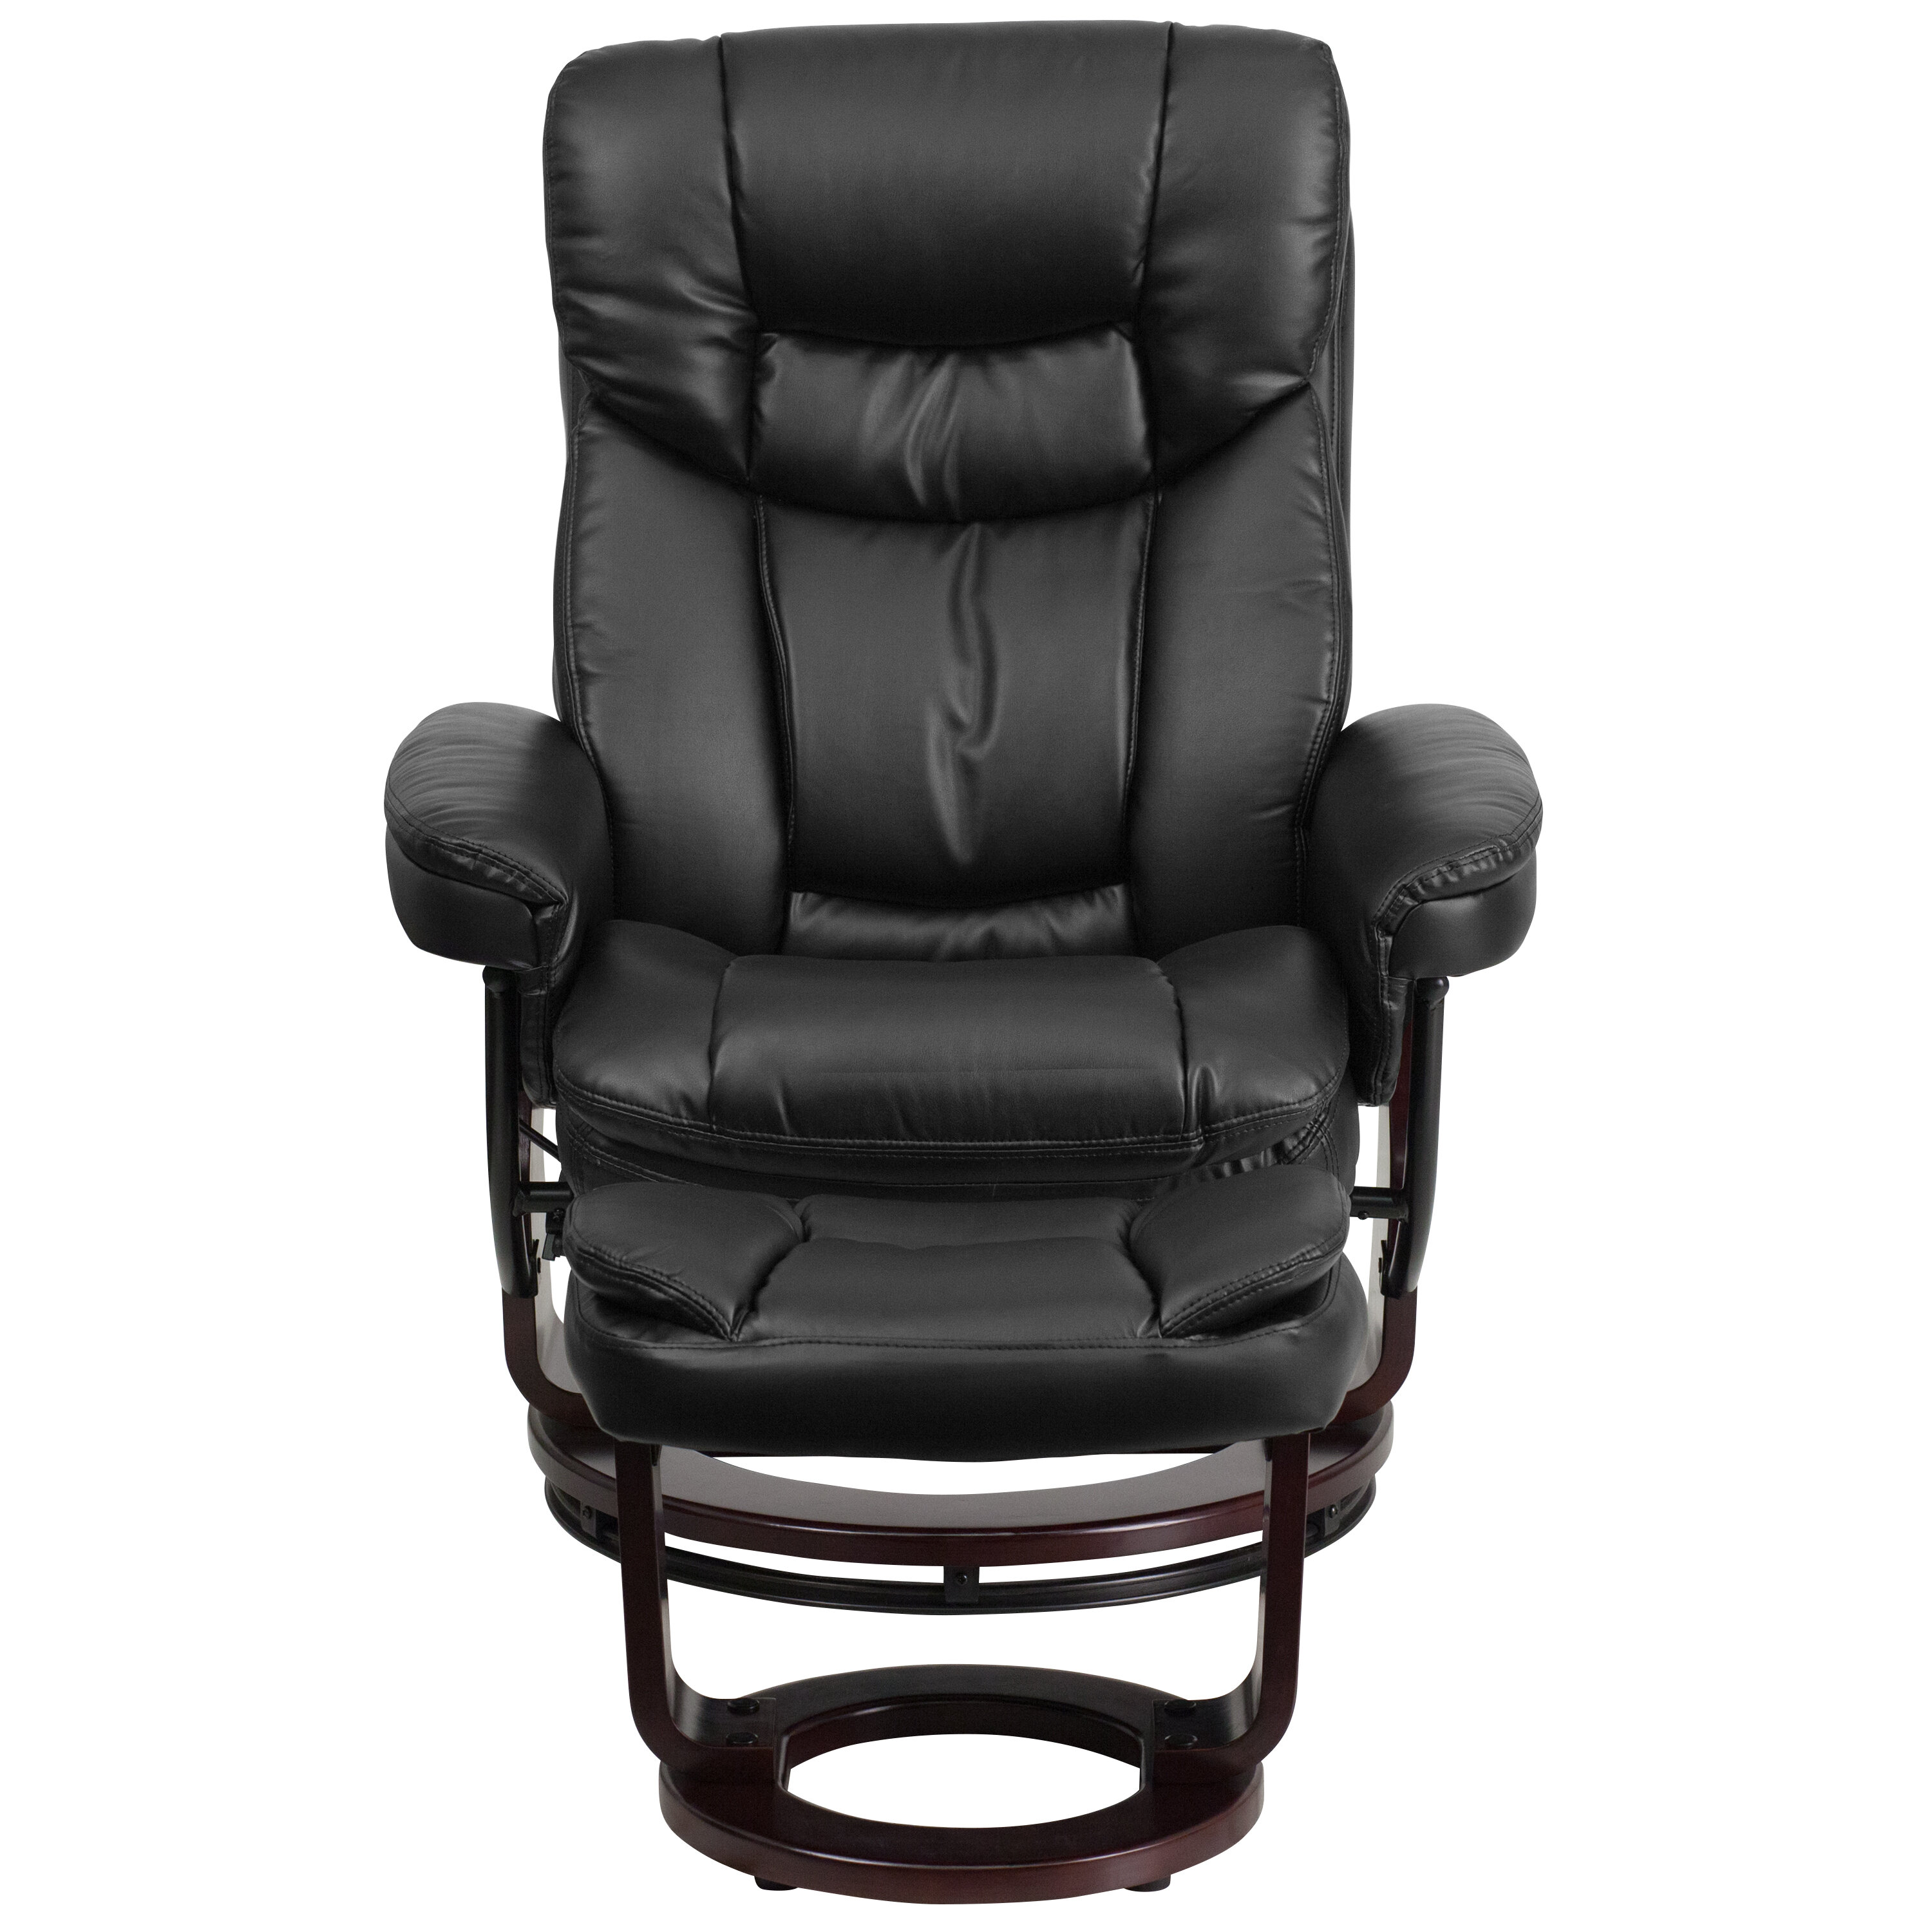 33” Wide Manual Swivel Standard Recliner with Ottoman